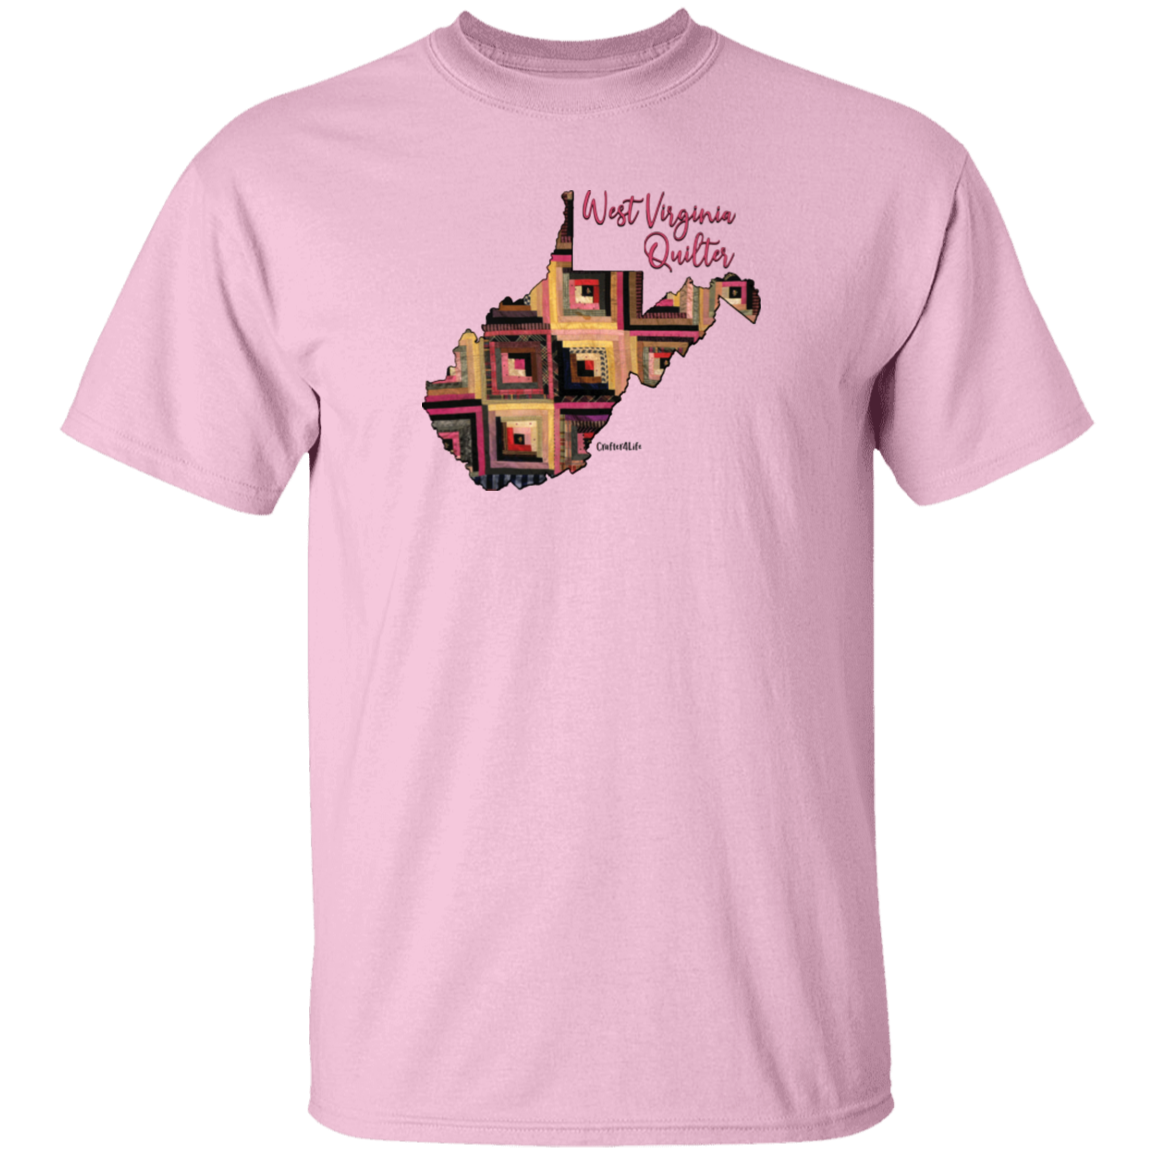 West Virginia Quilter T-Shirt, Gift for Quilting Friends and Family